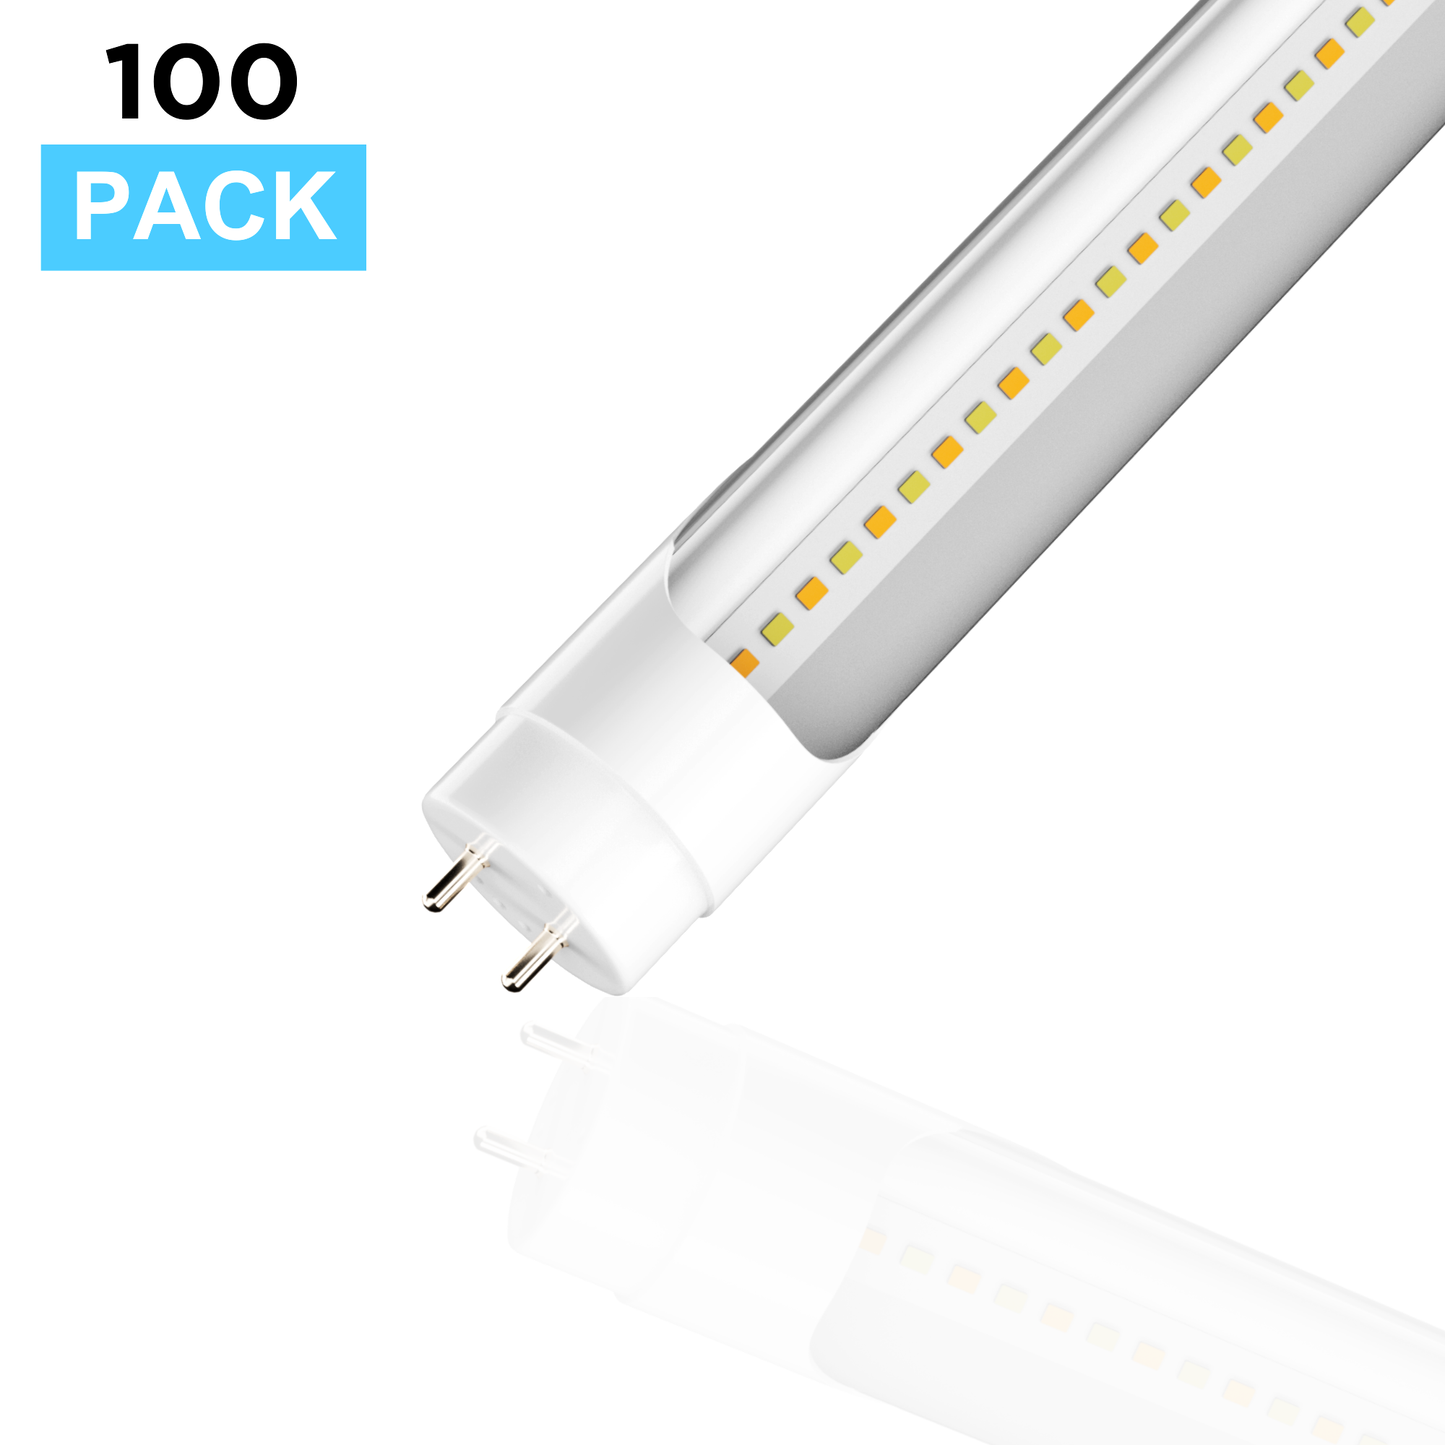 Hybrid T8 4ft LED Tube/Bulb - 22w/18w/15w/12w Wattage Adjustable, 130lm/w, 3000k/4000k/5000k/6500k CCT Changeable, Clear, Base G13, Single End/Double End Power - Ballast Compatible or Bypass